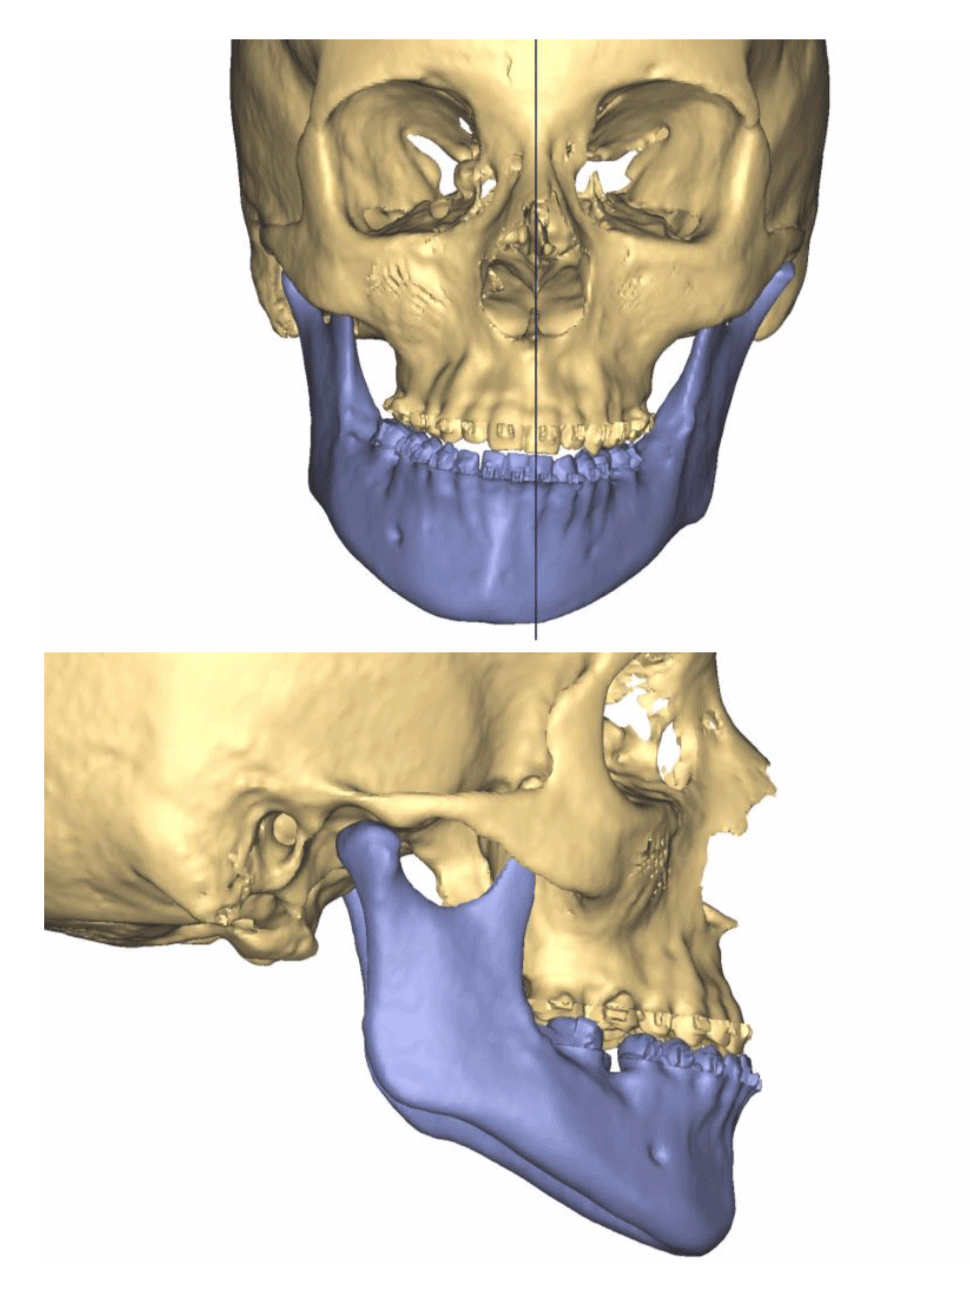 Animation showing the proposed plan of a typical double jaw surgery procedure.